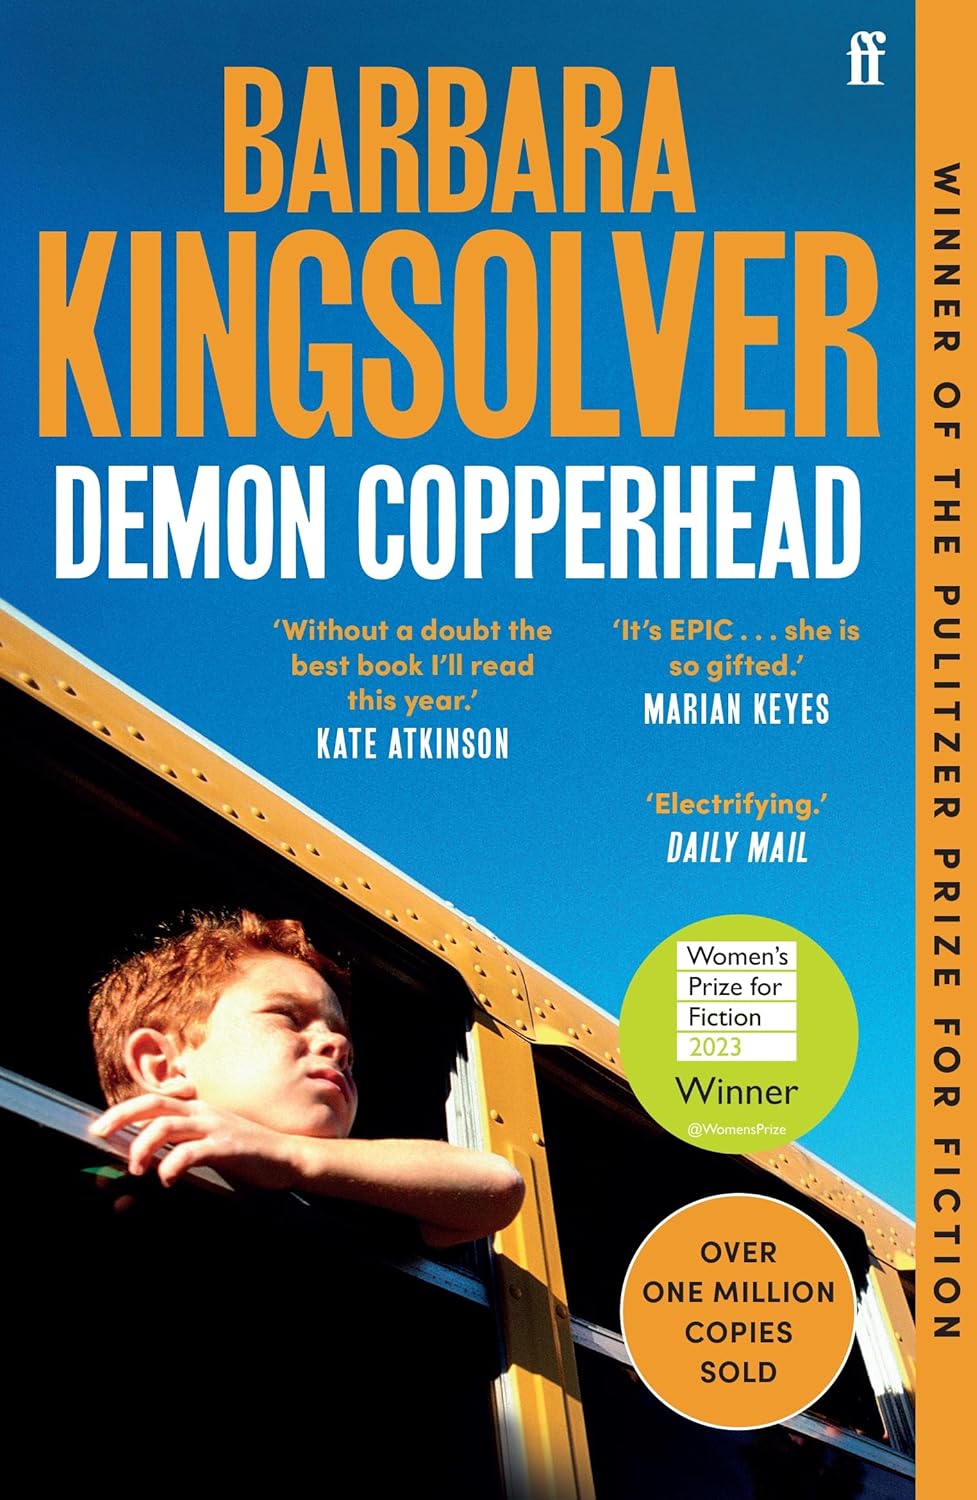 The front cover of Demon Copperhead. A young boy with ginger hair is looking out of a steel structure and squinting at the sun. The blue sky is above, with the book's title and author.